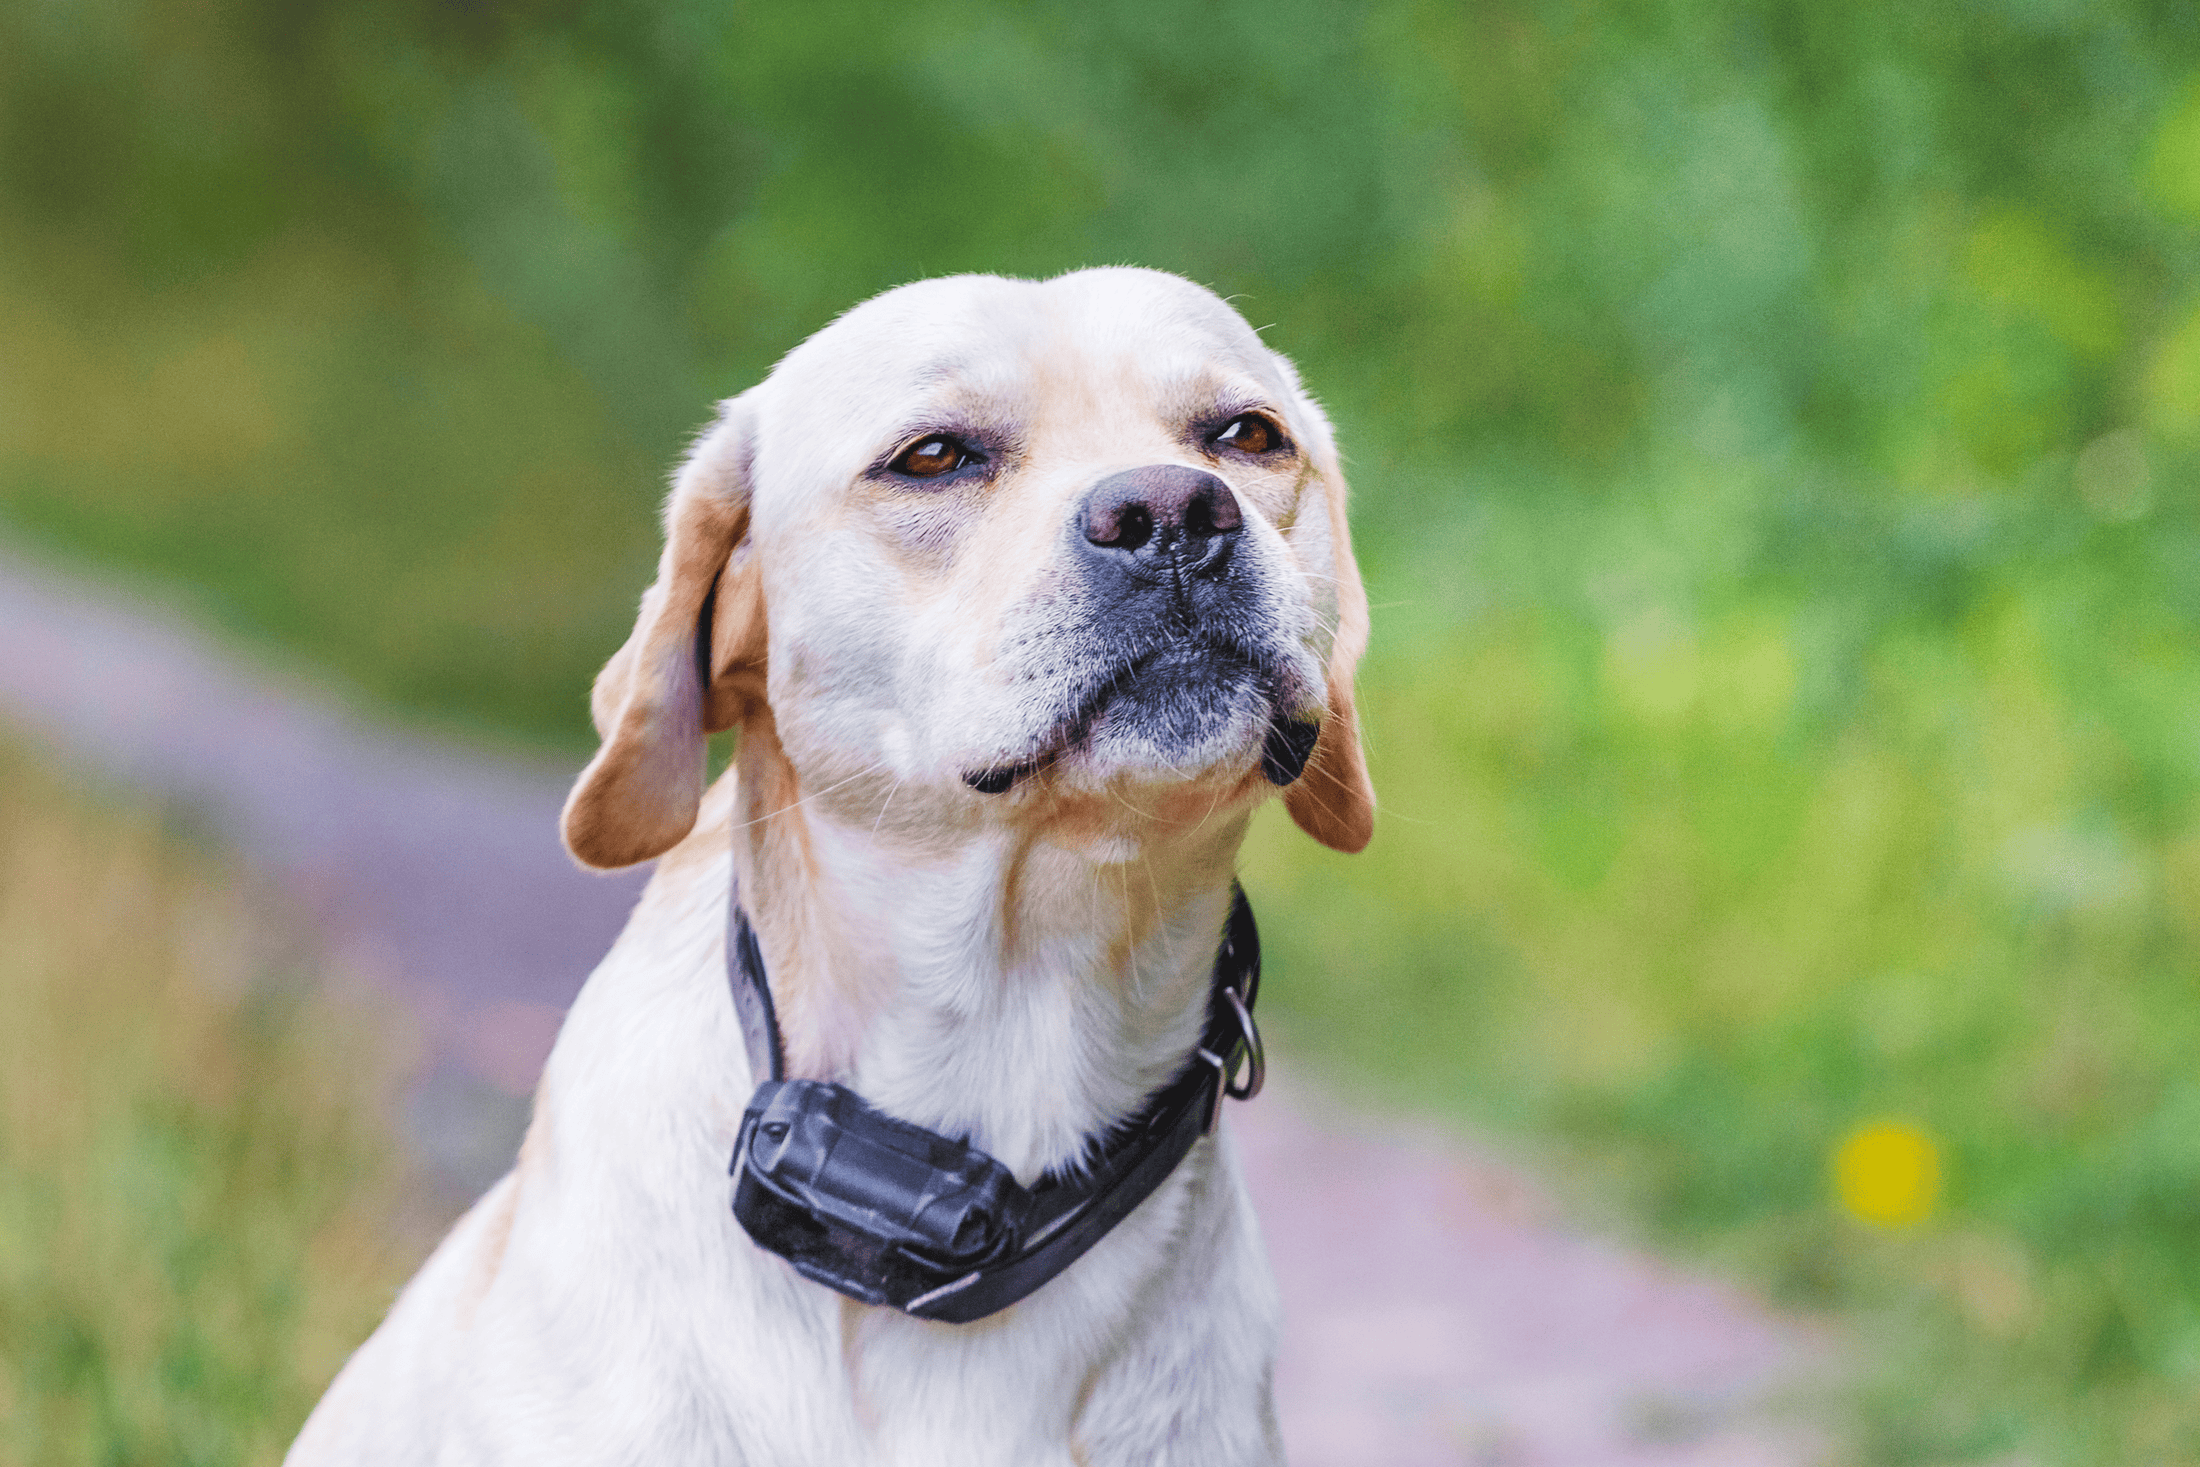 If you want your dog to stop barking at visitors, please do not use a bark collar. Instead, reward your dog or puppy with treats when she is quiet;